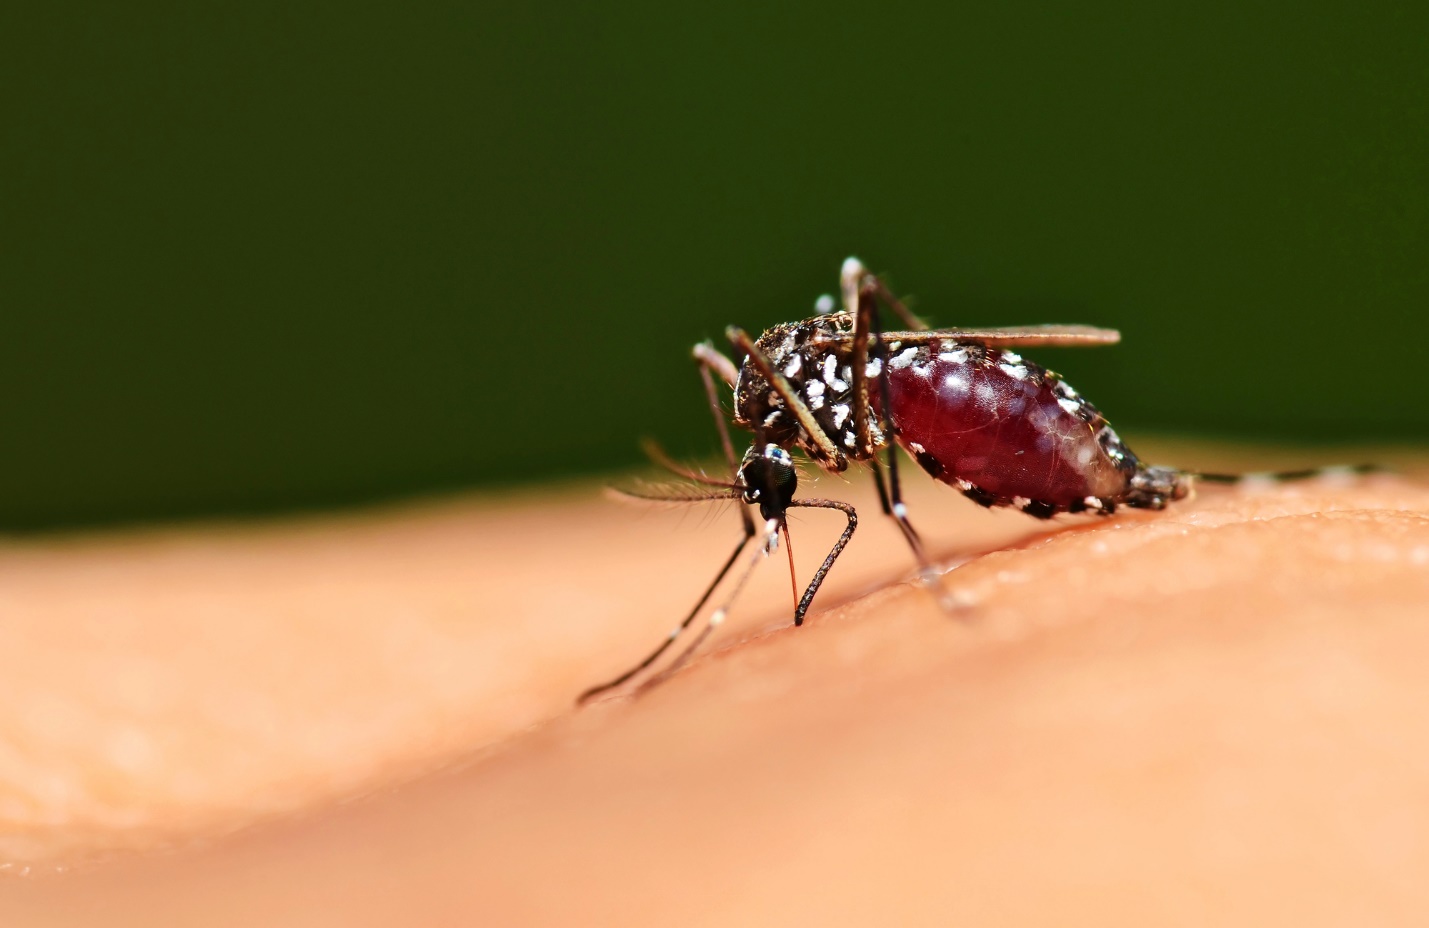 A mosquito on a person's skin

Description automatically generated